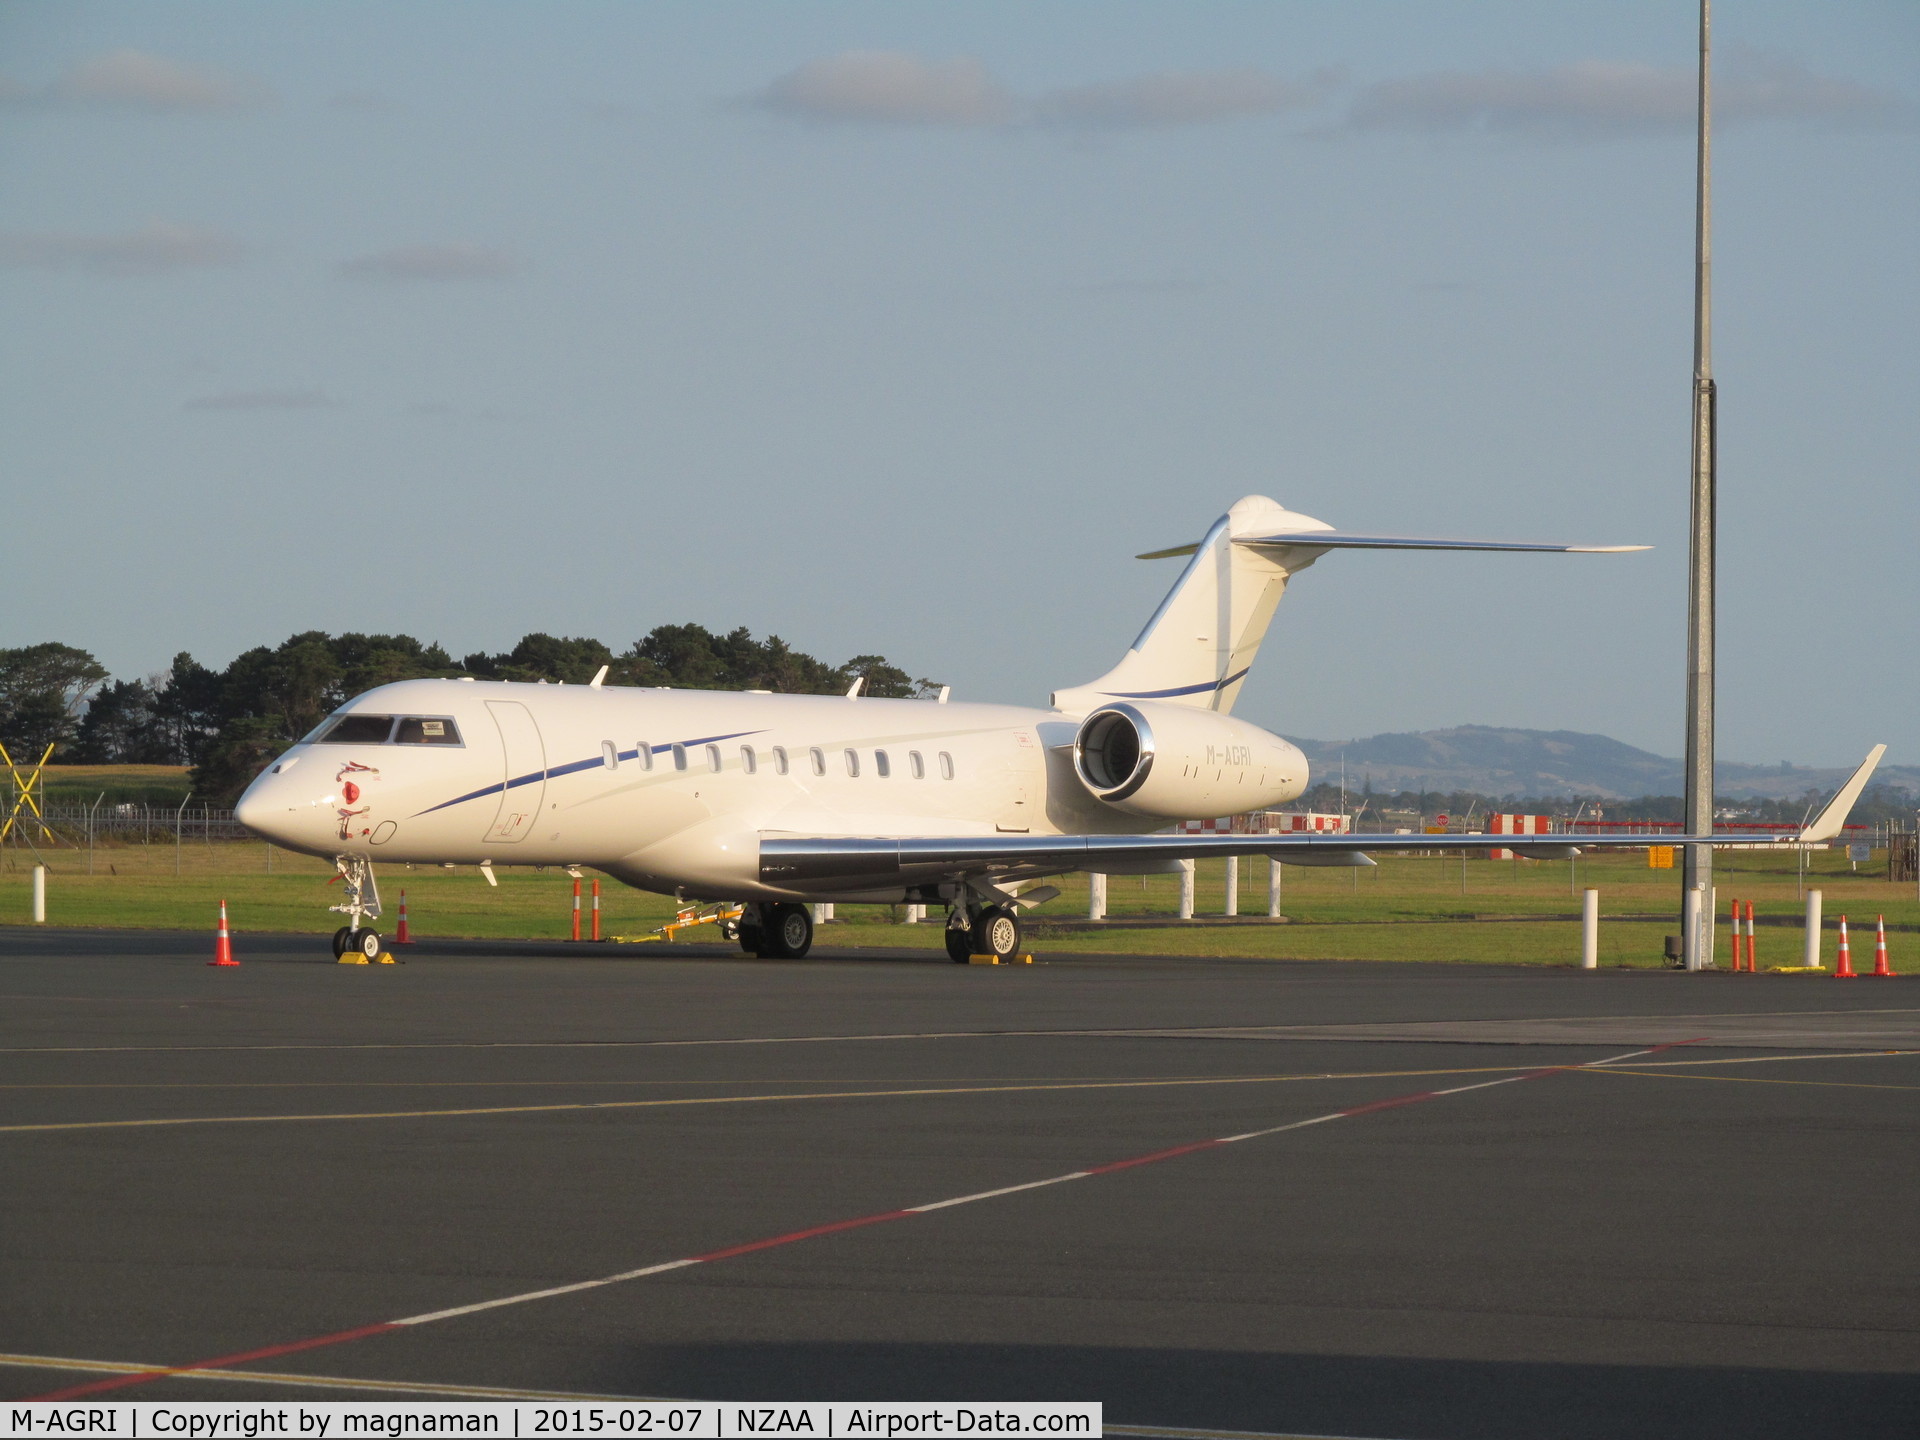 M-AGRI, 2014 Bombardier BD-700-1A11 Global 5000 C/N 9597, up from visiting queenstown with other billionaires party on M V Serene